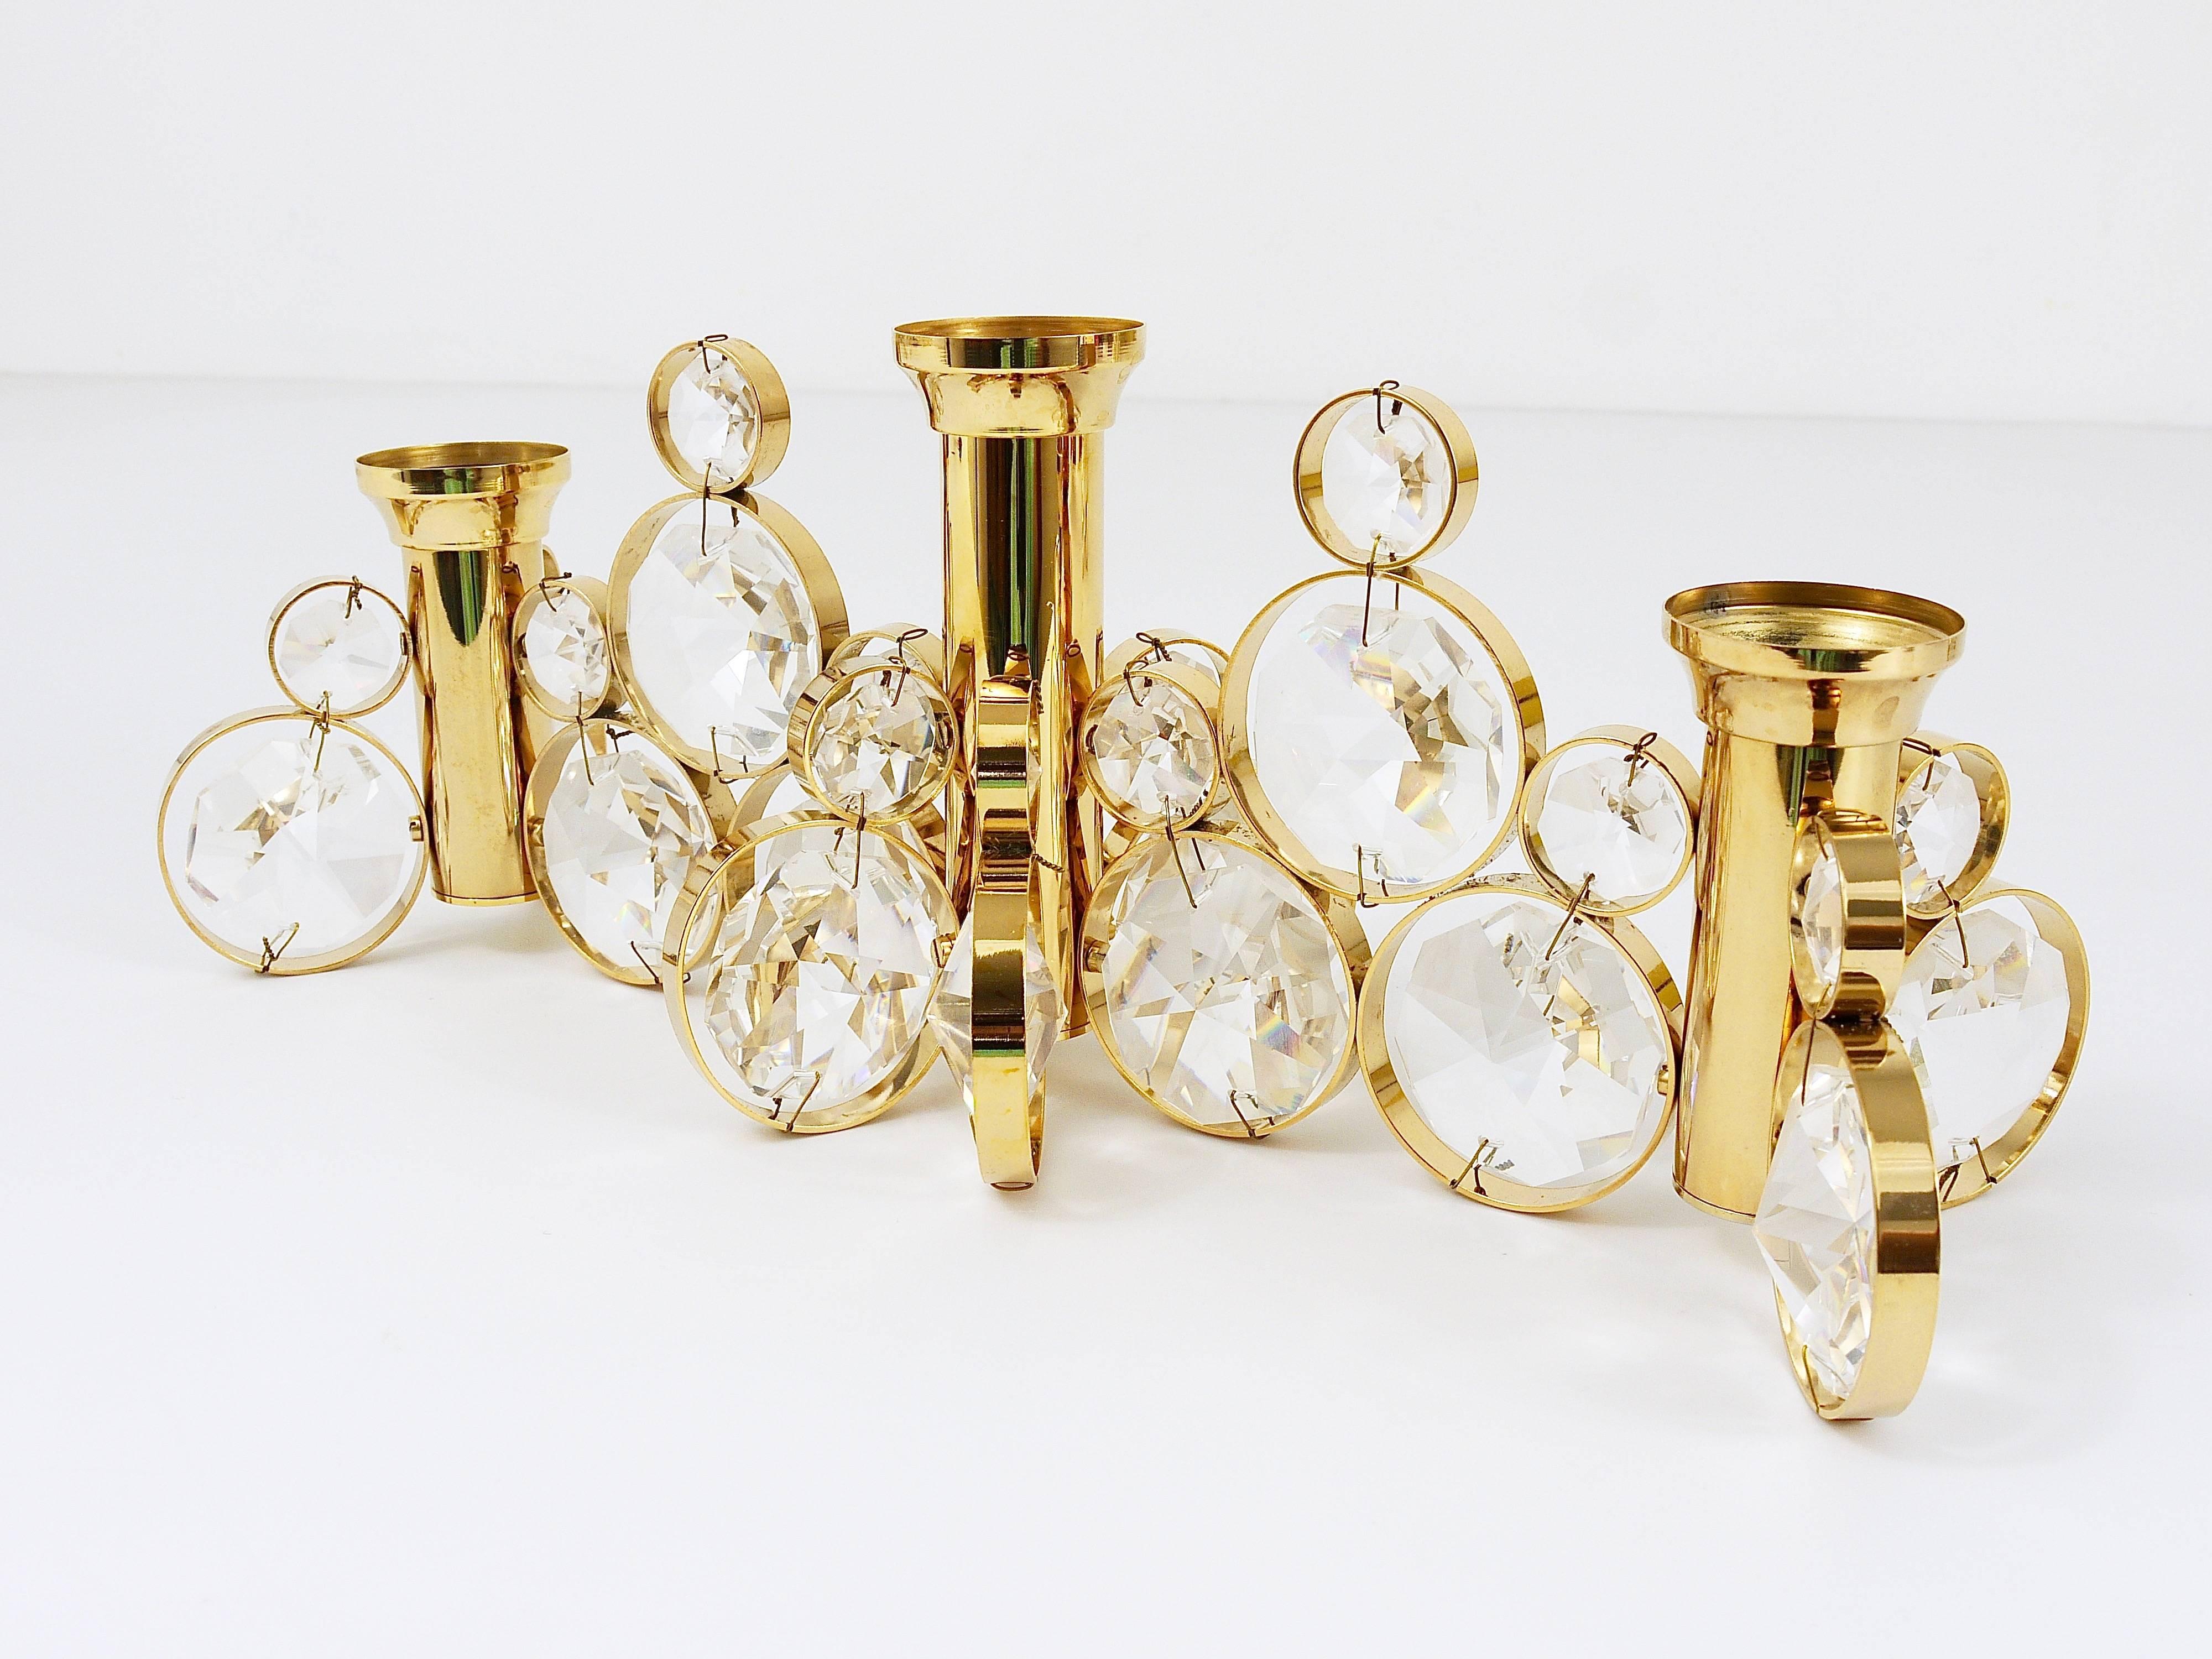 5x Palwa Gaetano Sciolari Style Brass & Crystal Candle Holder Candlestick, 1970s For Sale 2